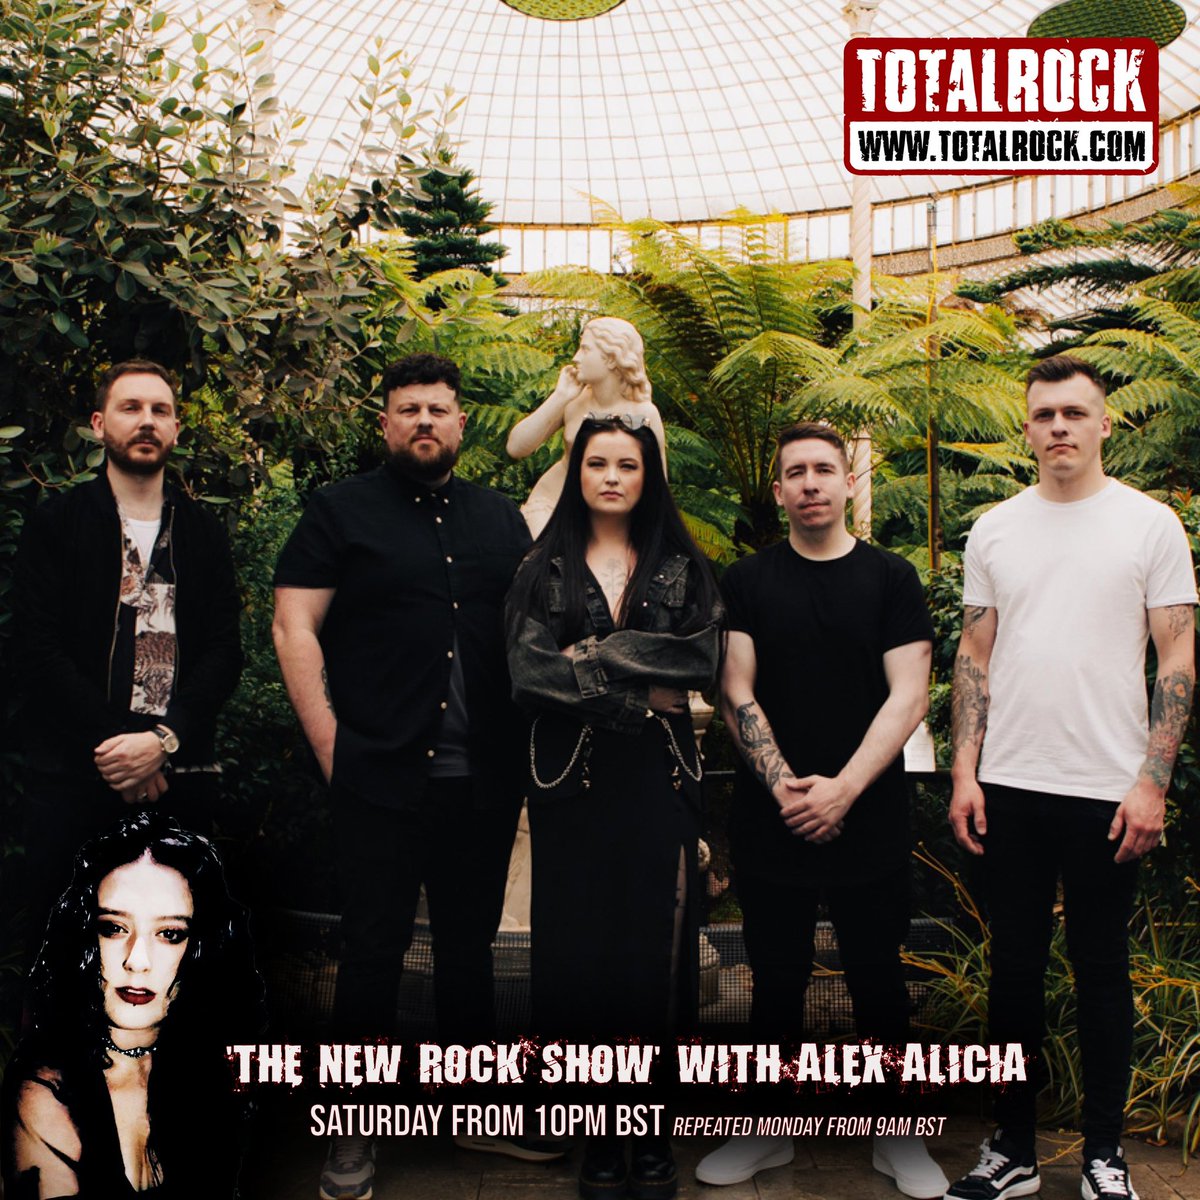 The awesome @alexalicia96 will be giving our latest single “Lonely Ghost” a spin tonight on @TotalRockOnline 

Listen live from 10pm: totalrock.com/popup-player/ 

#emo #newemo #altrock #emopoprock #poprock #altemo #elderemo #newmusic #totalrock #totalrockonline